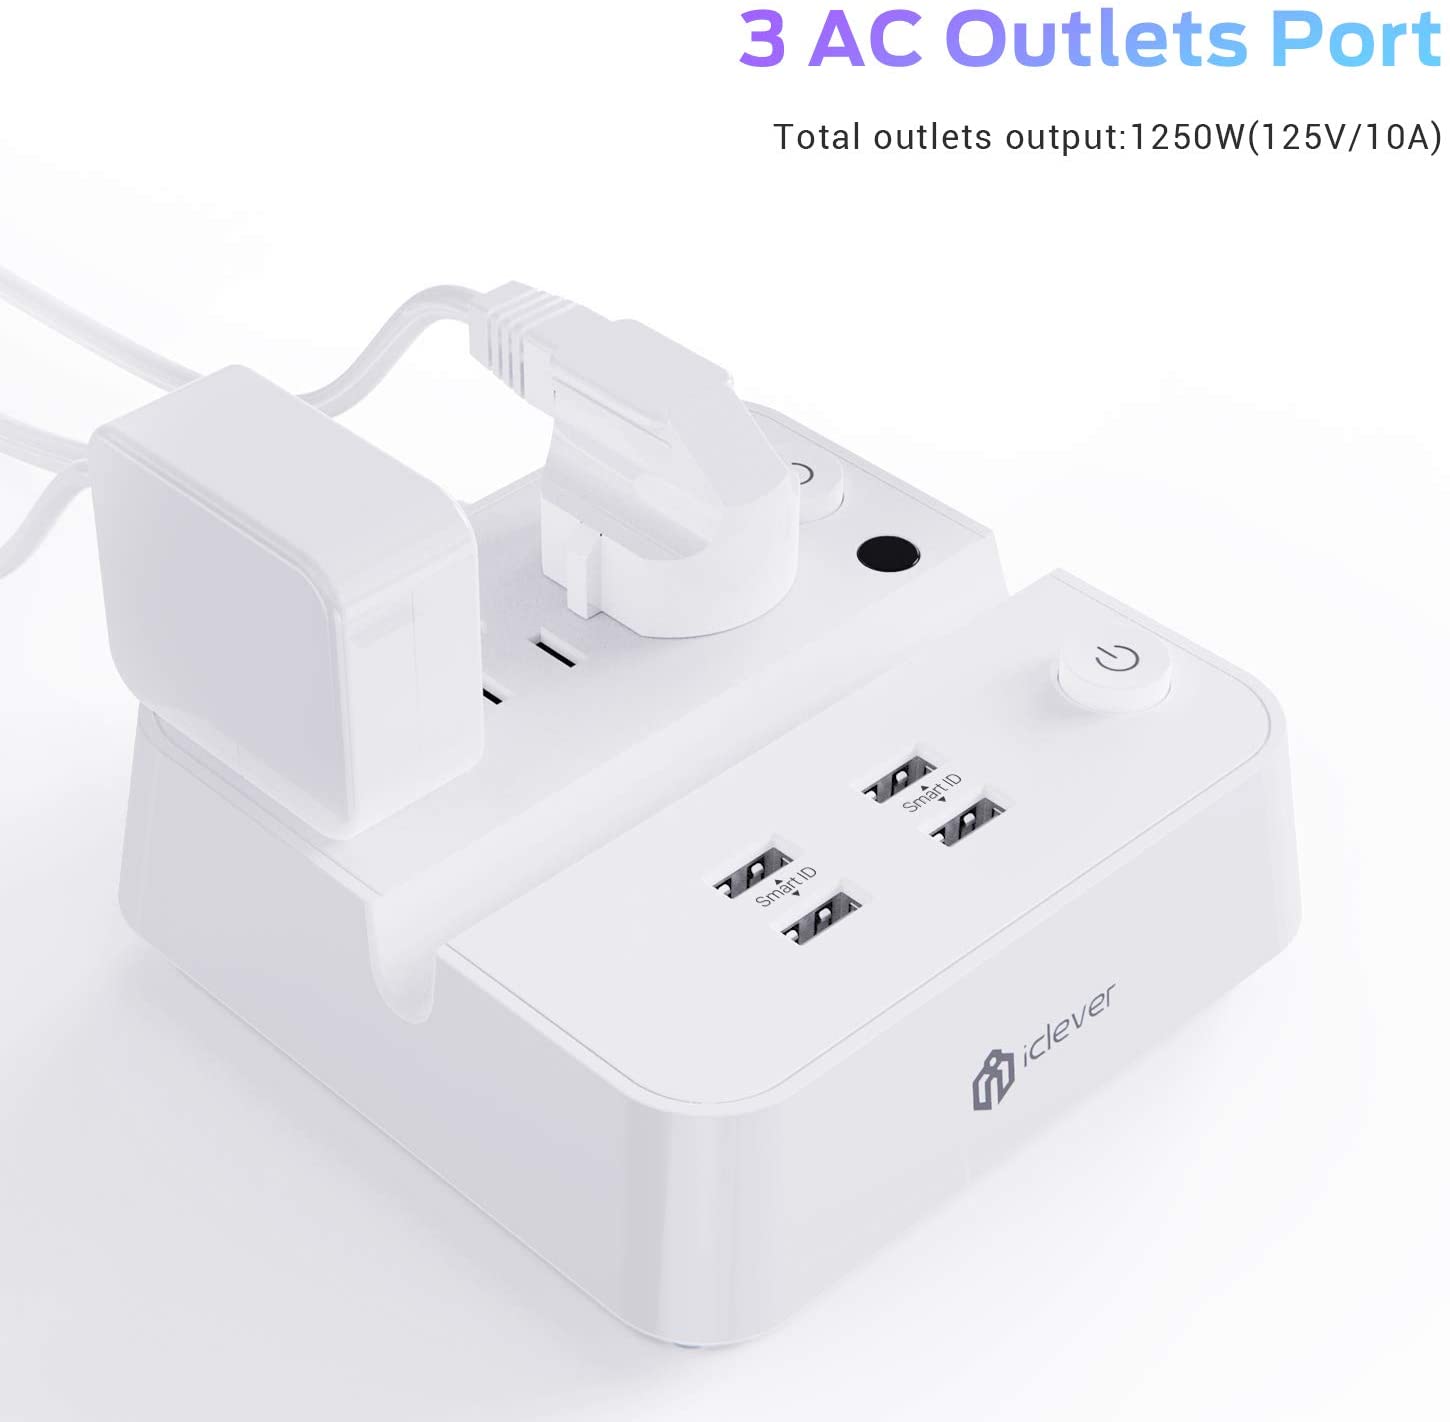  Intocircuit 5V 2A Portable Universal Travel AC Wall